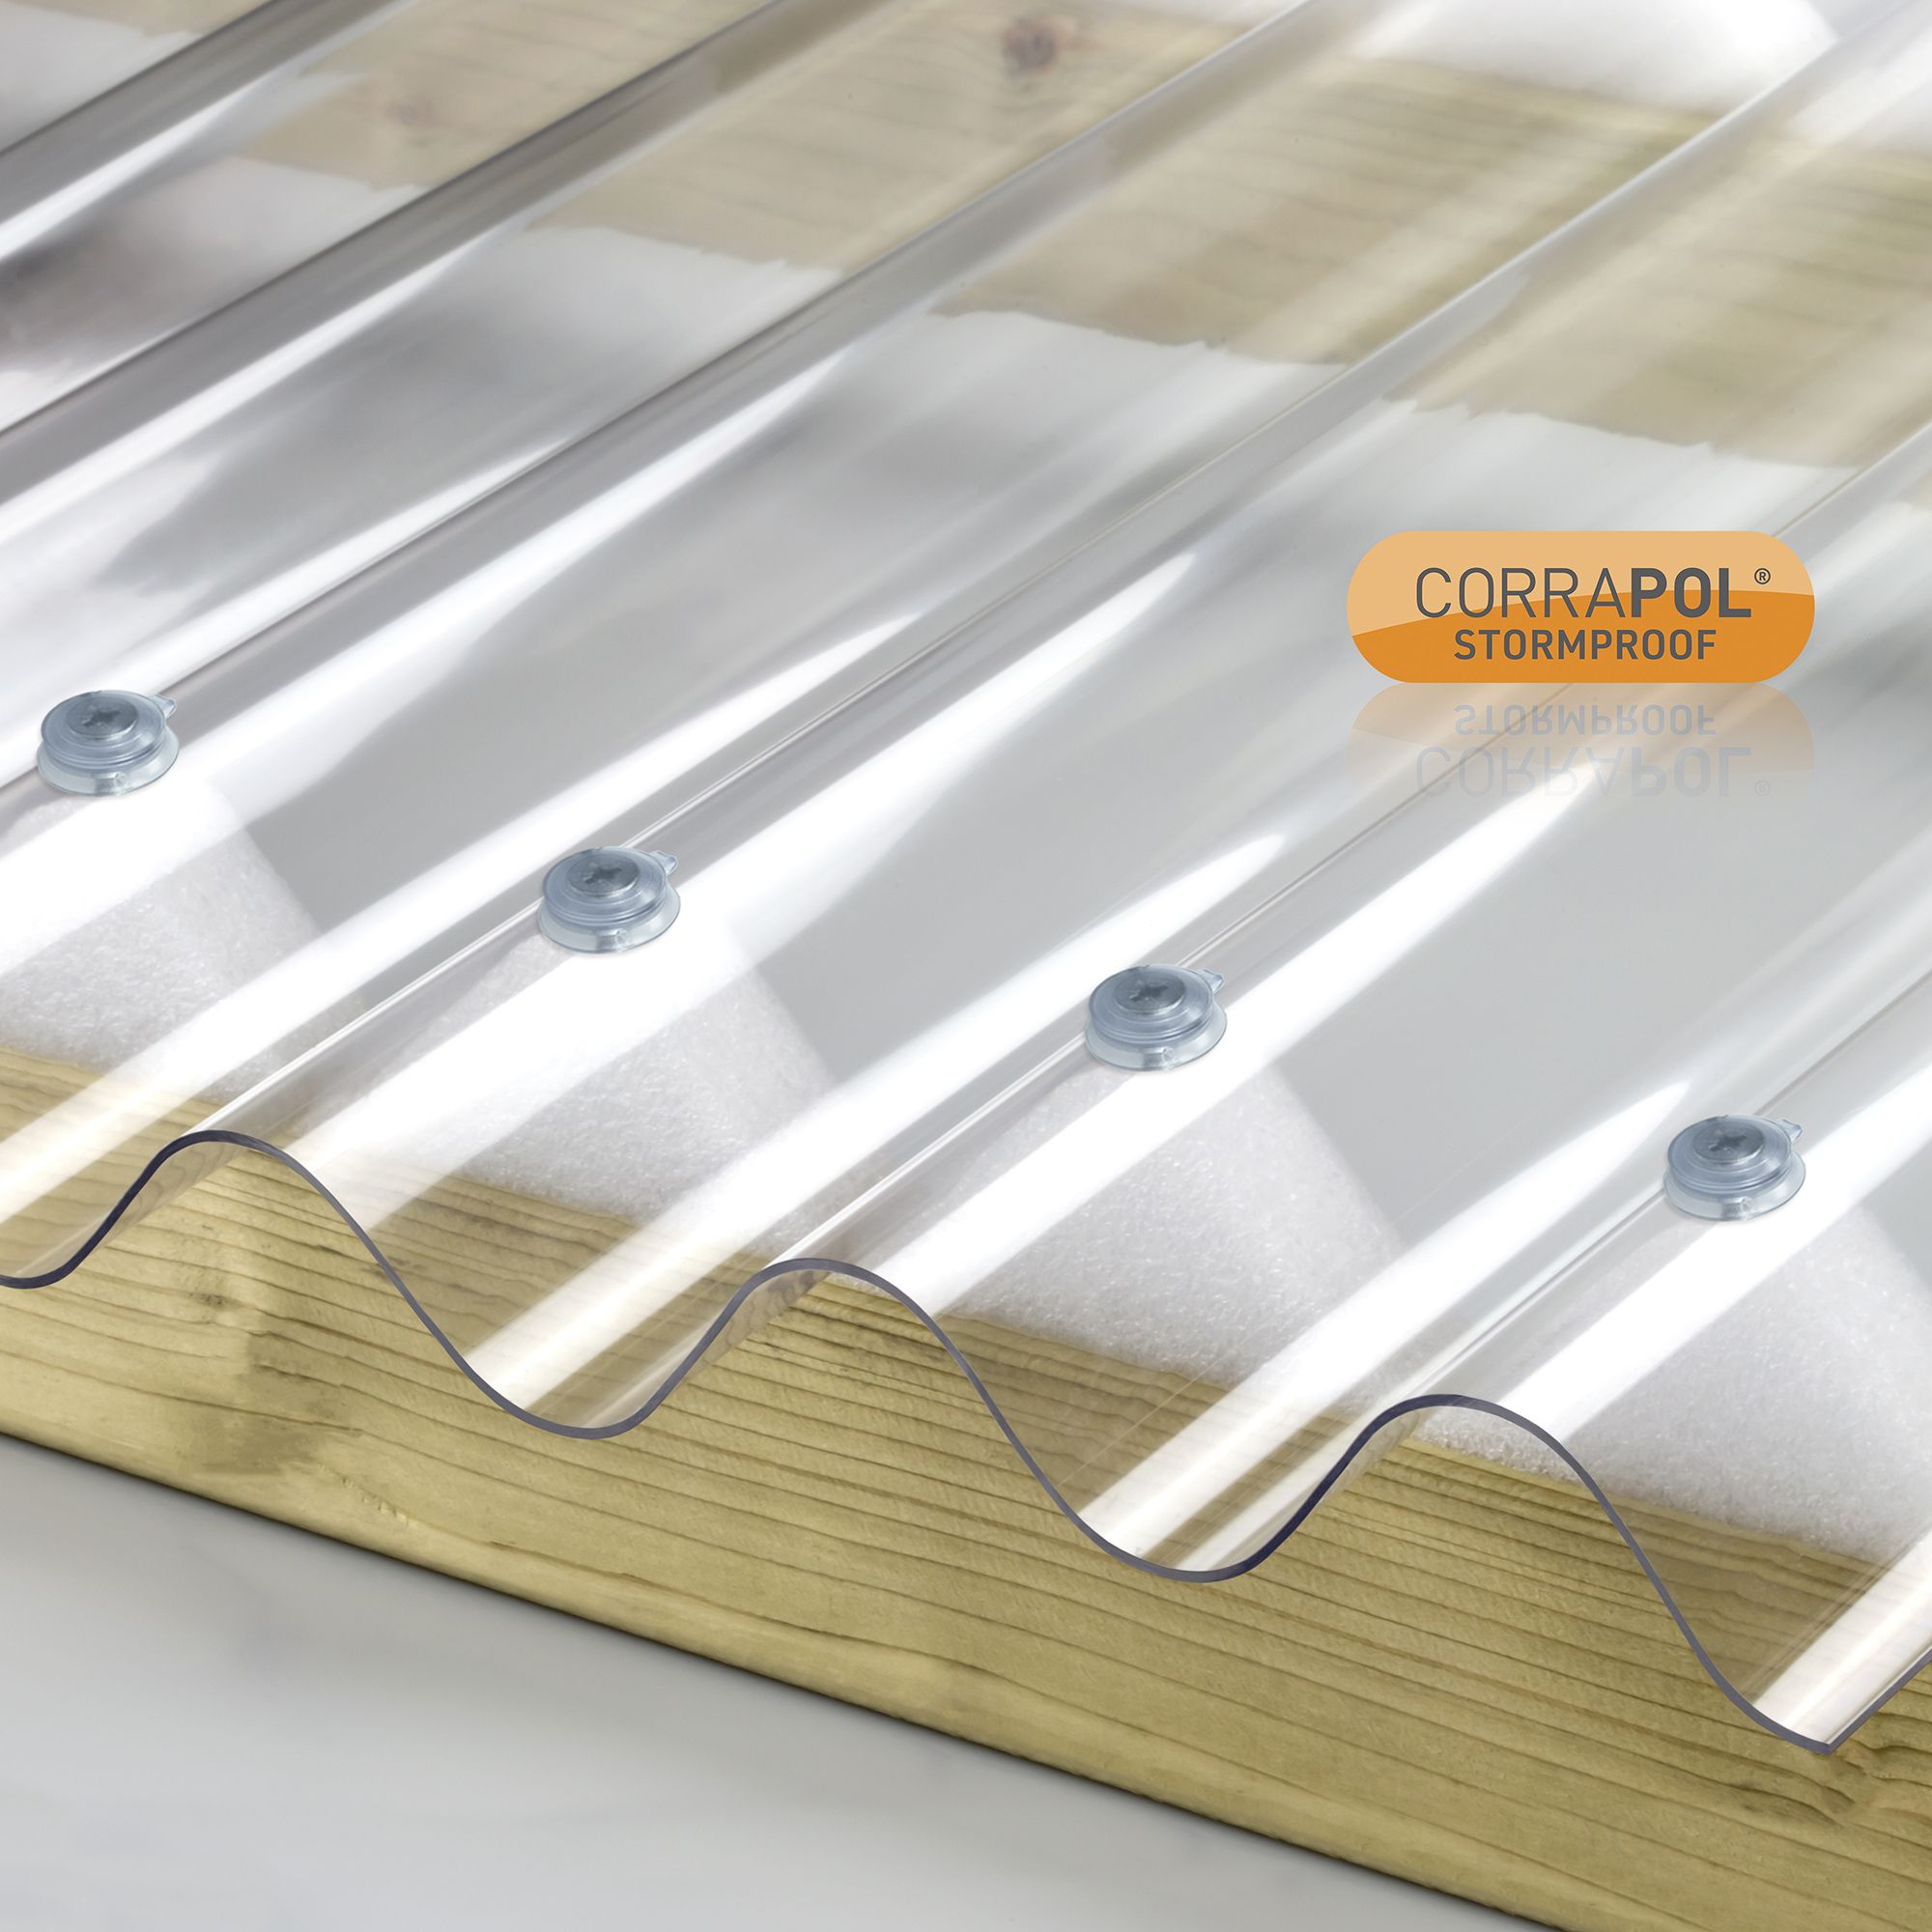 Corrapol Clear Polycarbonate Corrugated Roofing sheet (L)2.5m (W)950mm (T)1mm